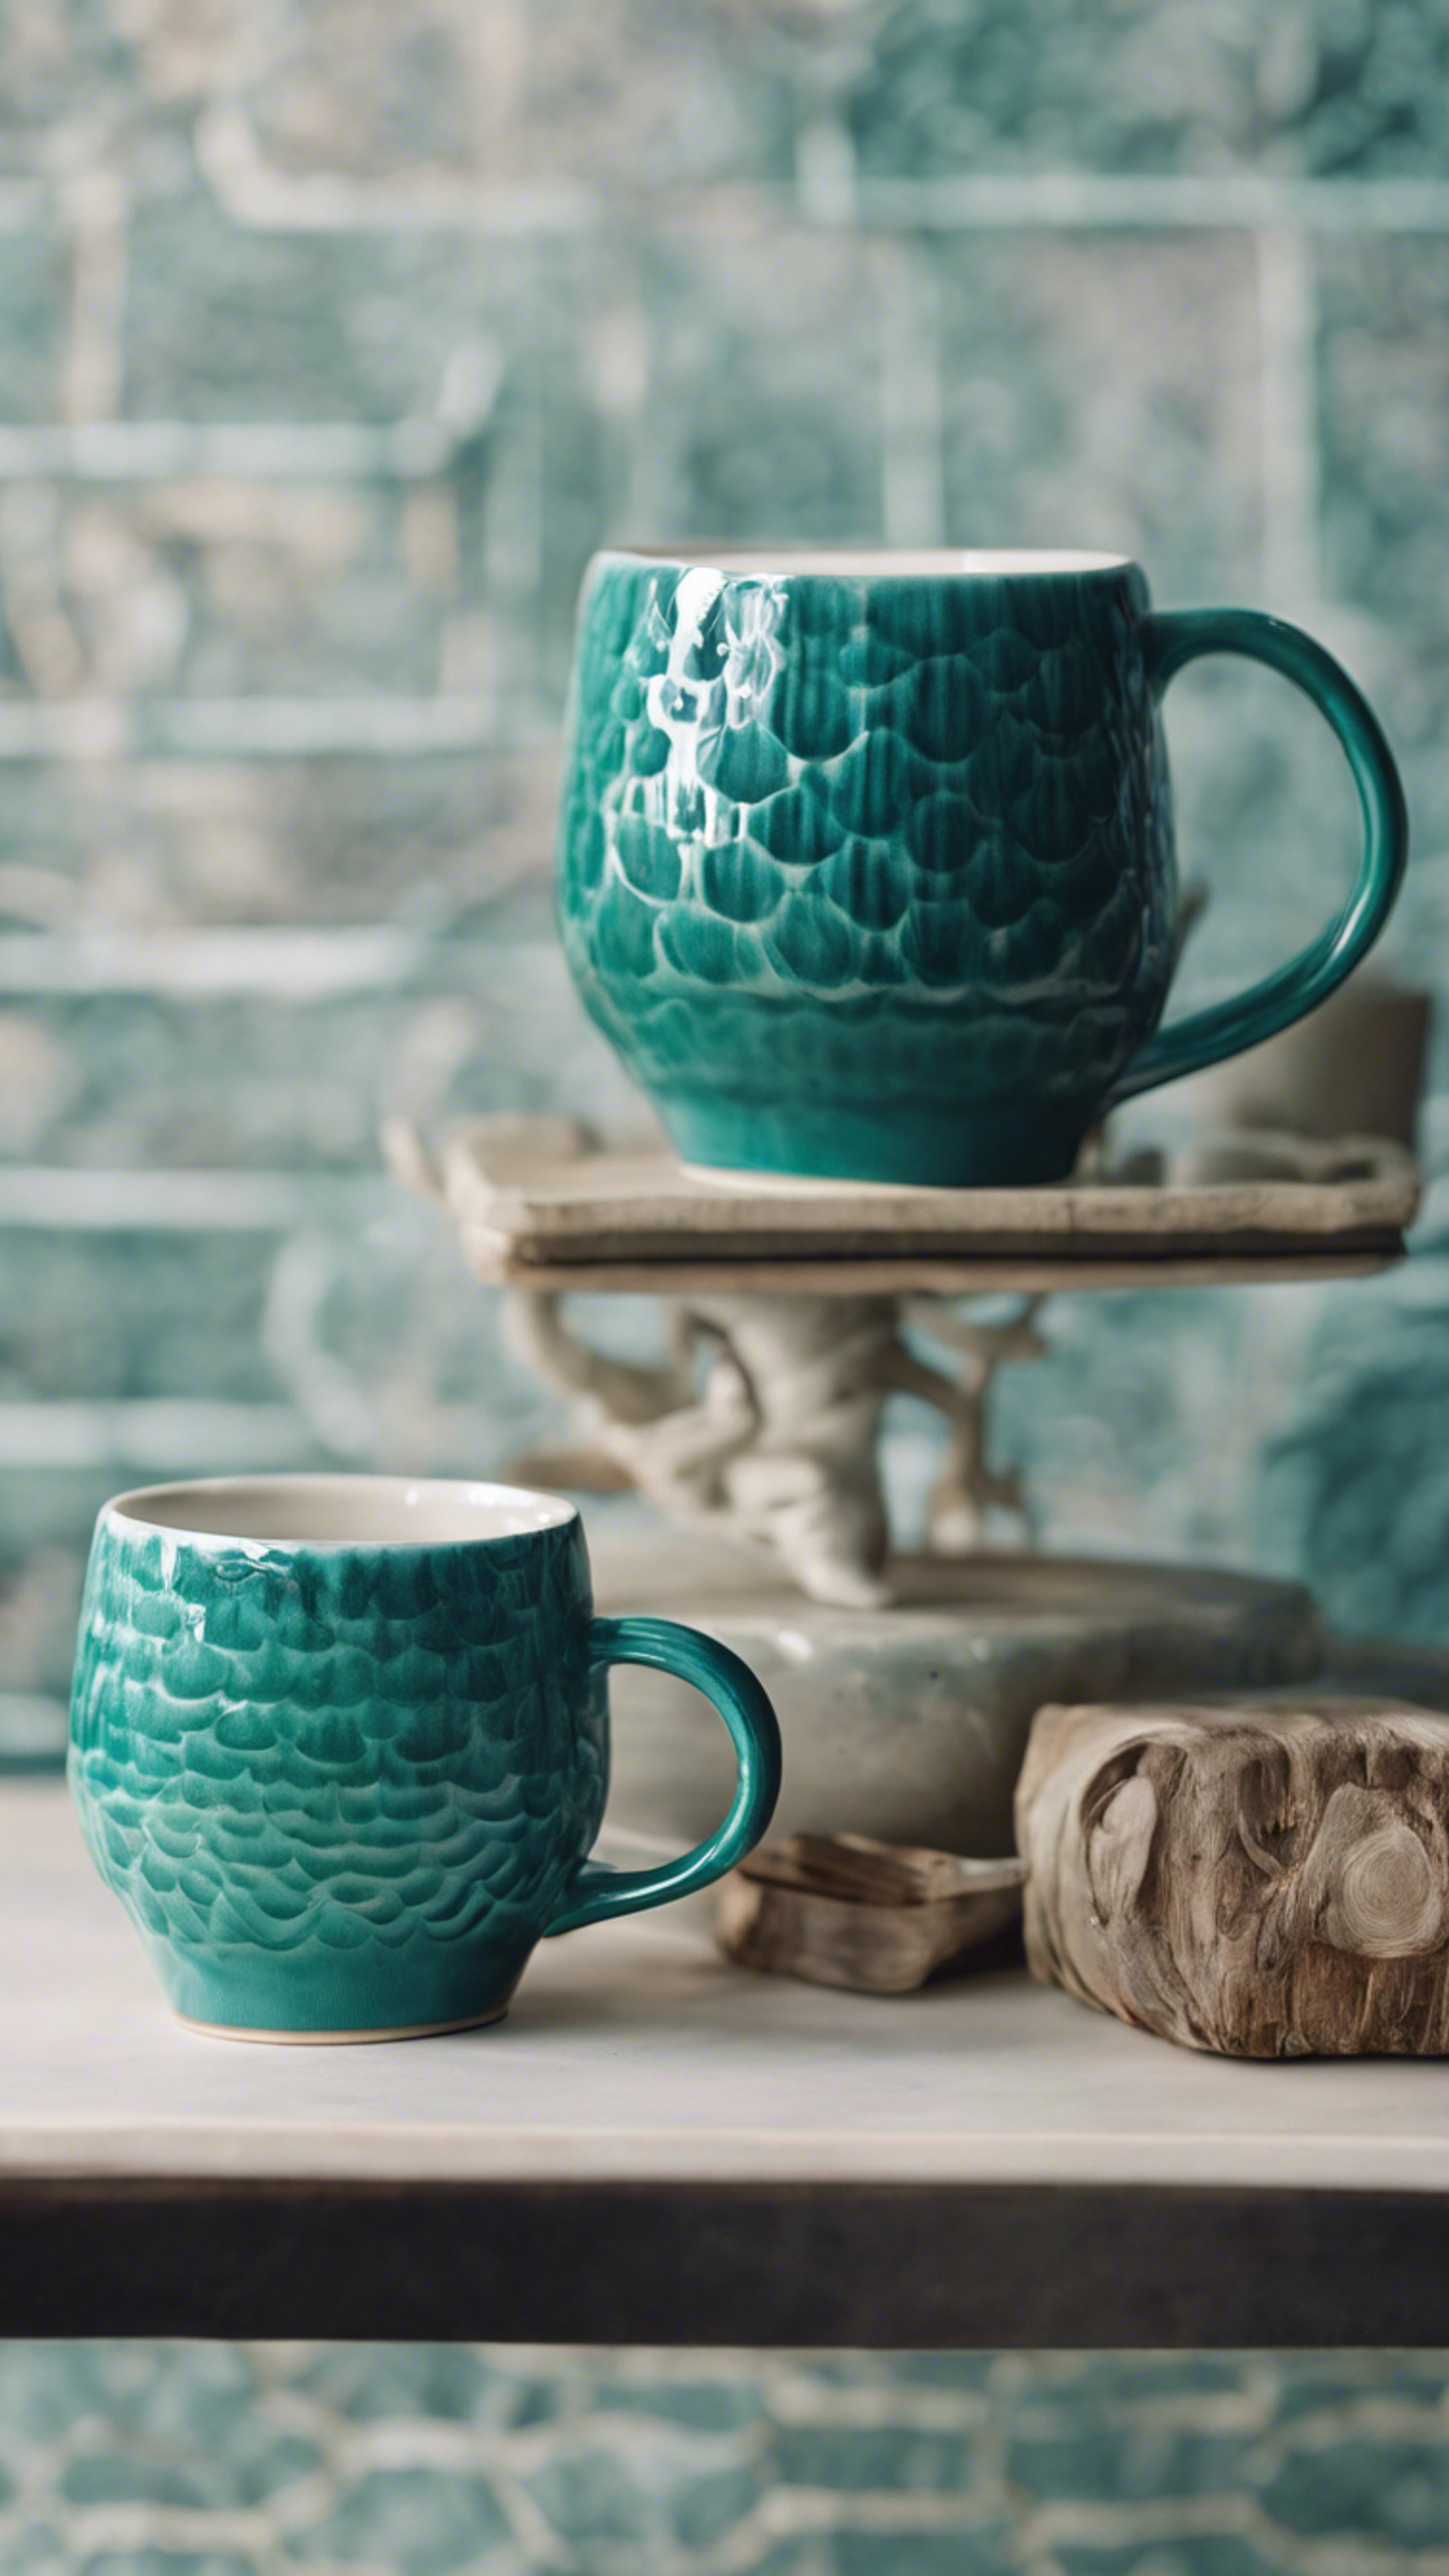 A scallop patterned ceramic mug with a cool teal glaze. Wallpaper[4f34e12456f849958891]